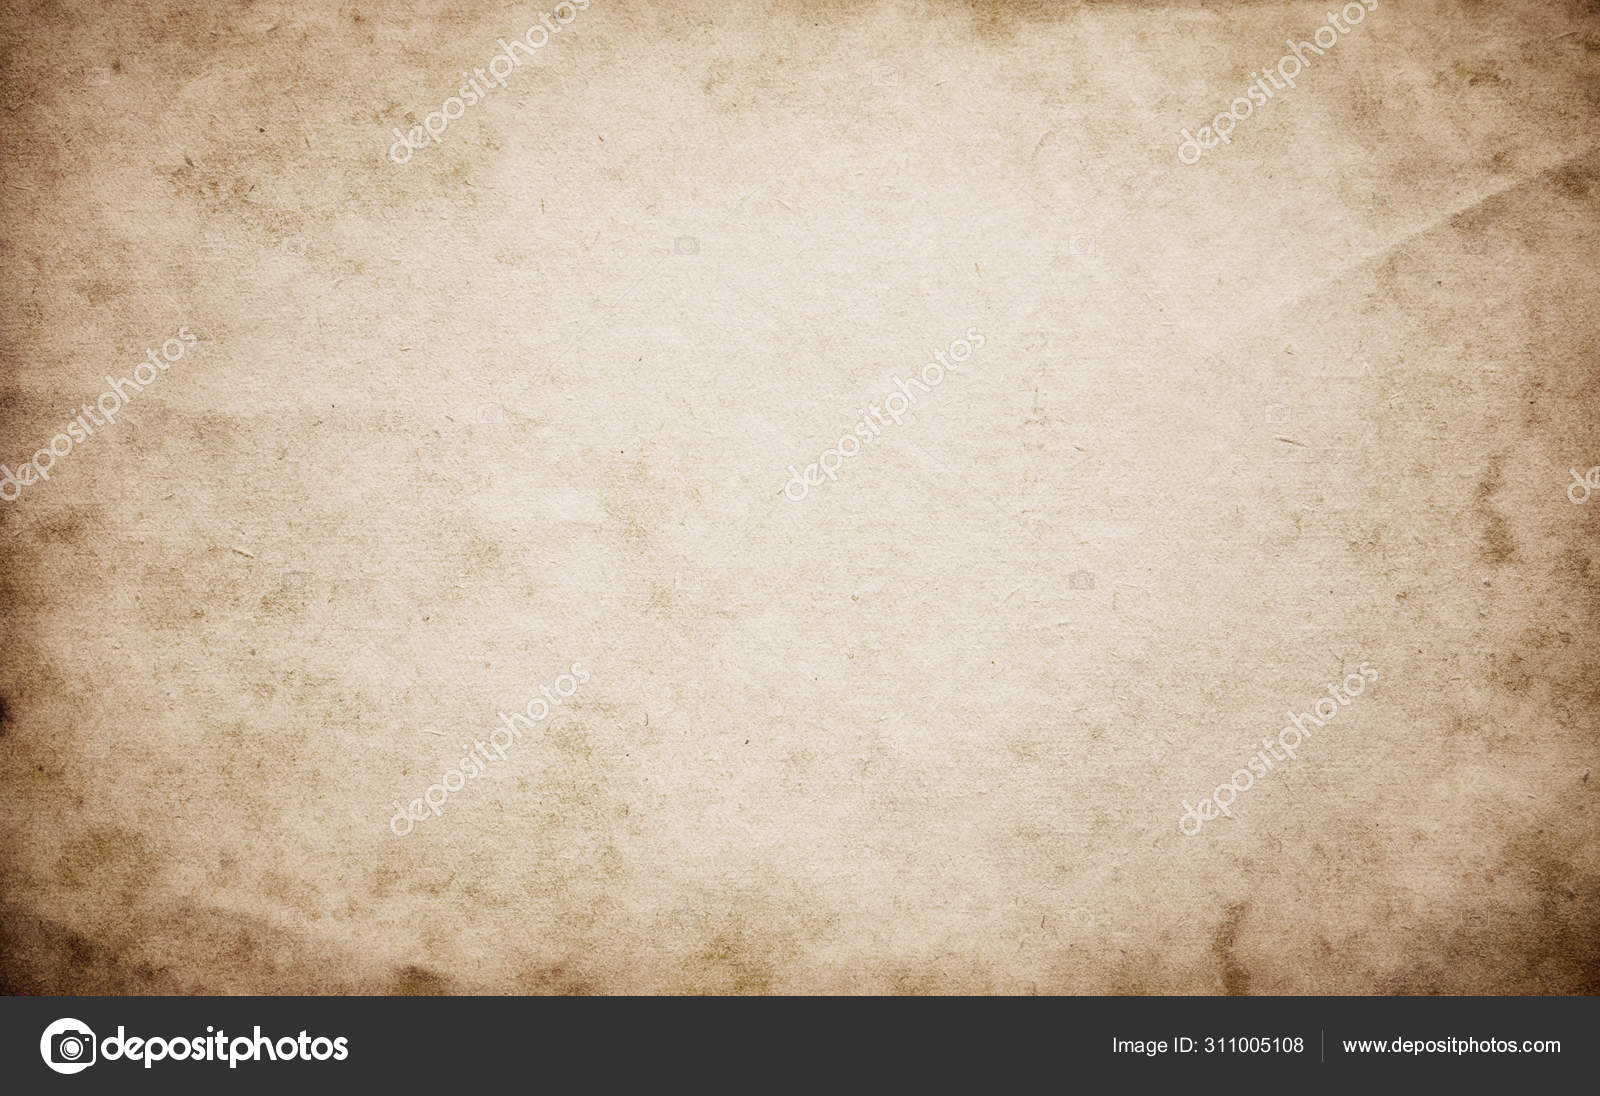 Old Paper texture. vintage paper background or texture Stock Photo